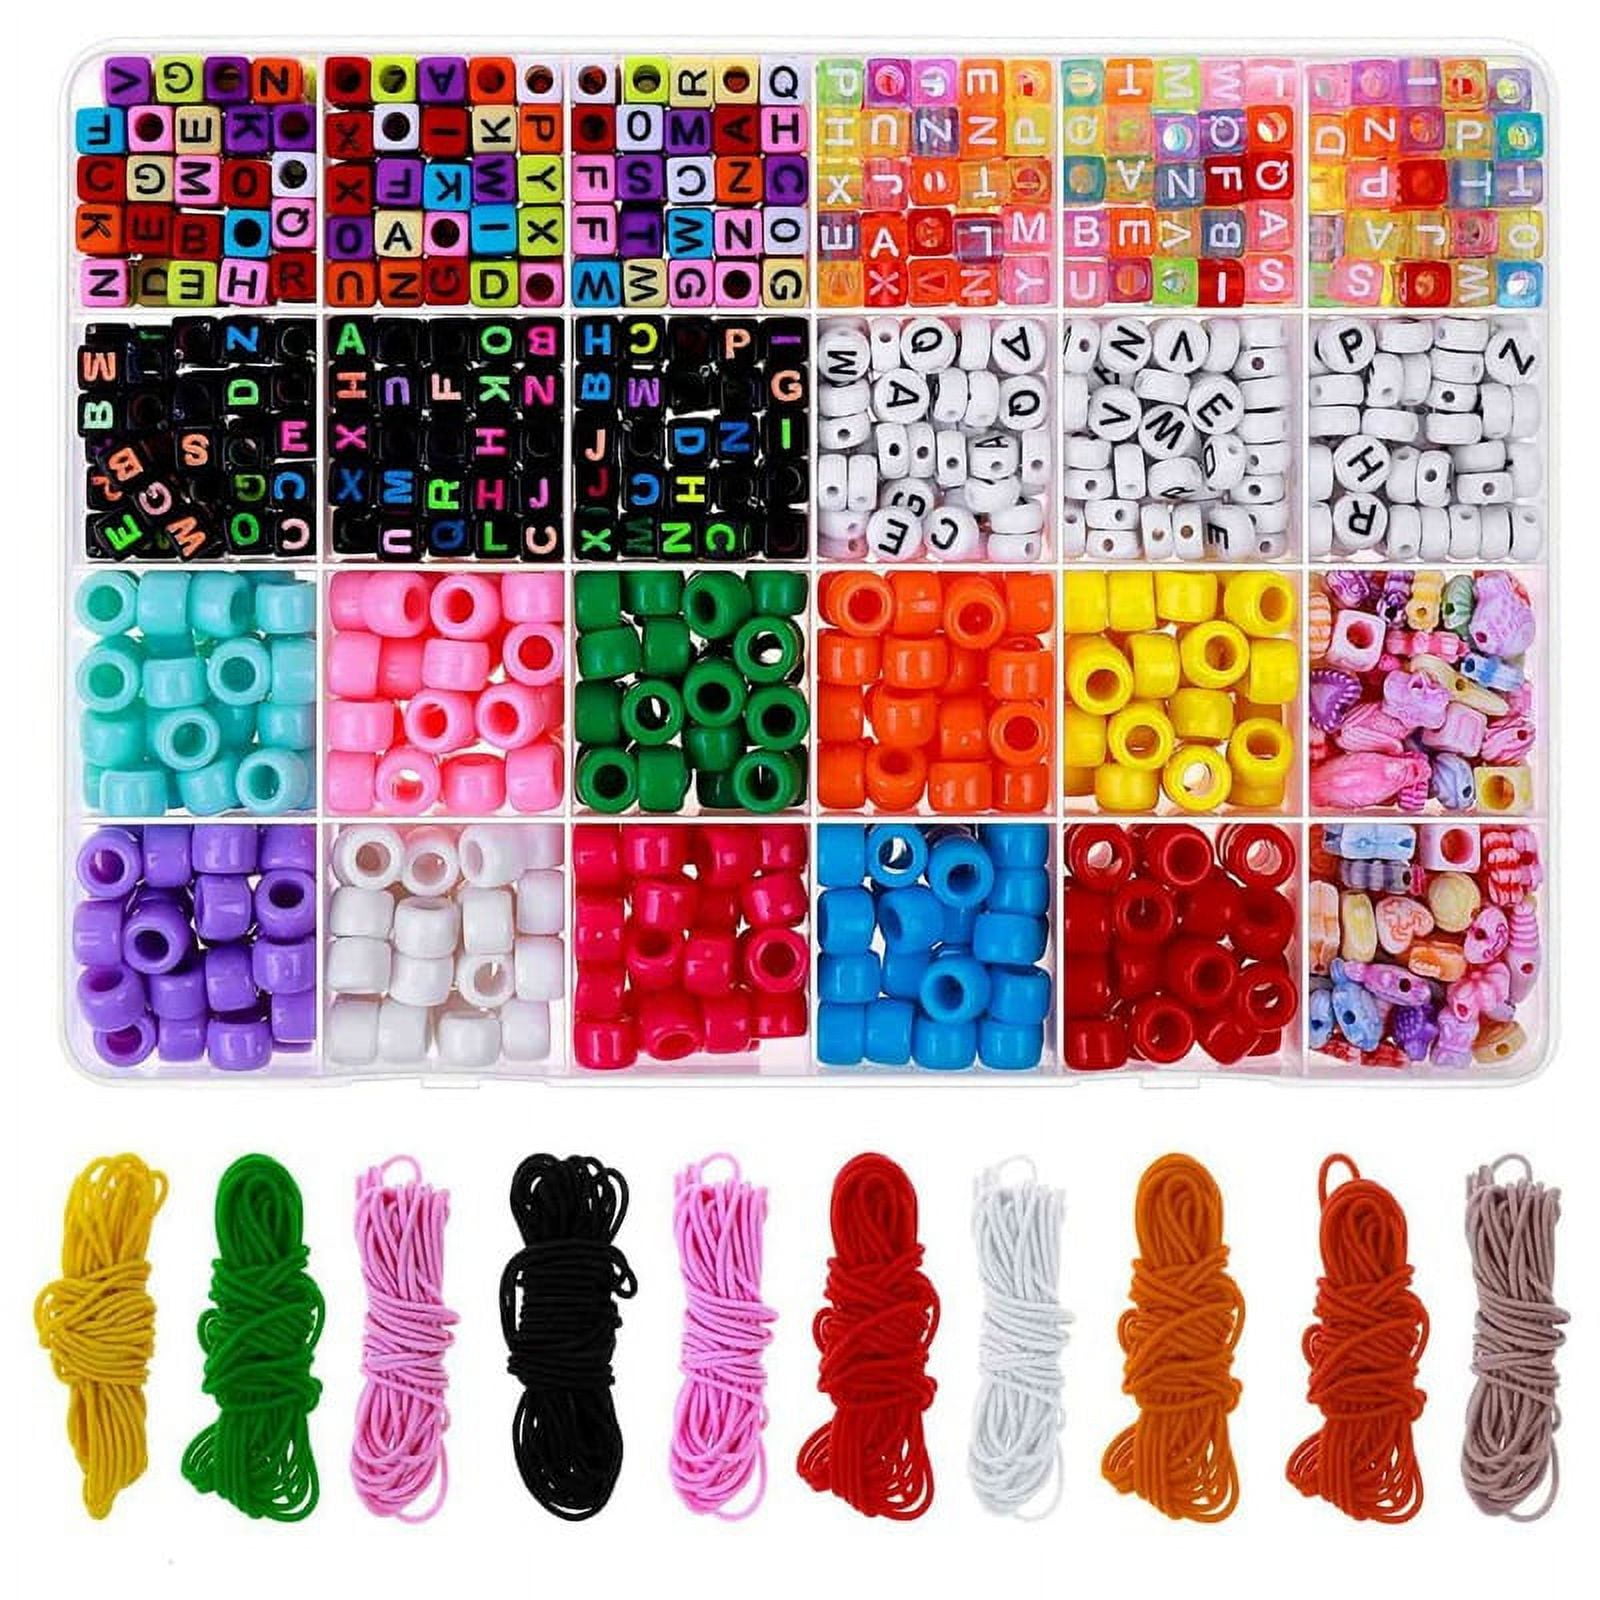 112 Pcs DIY Jewelry Making Kit with Bracelet,Pendant,Beads,Charms and  Necklace String - Charm Bracelet Making Kitfor Bracelets Craft & Necklace  Making, for Teen Girl Gifts Ages 8-12Y 